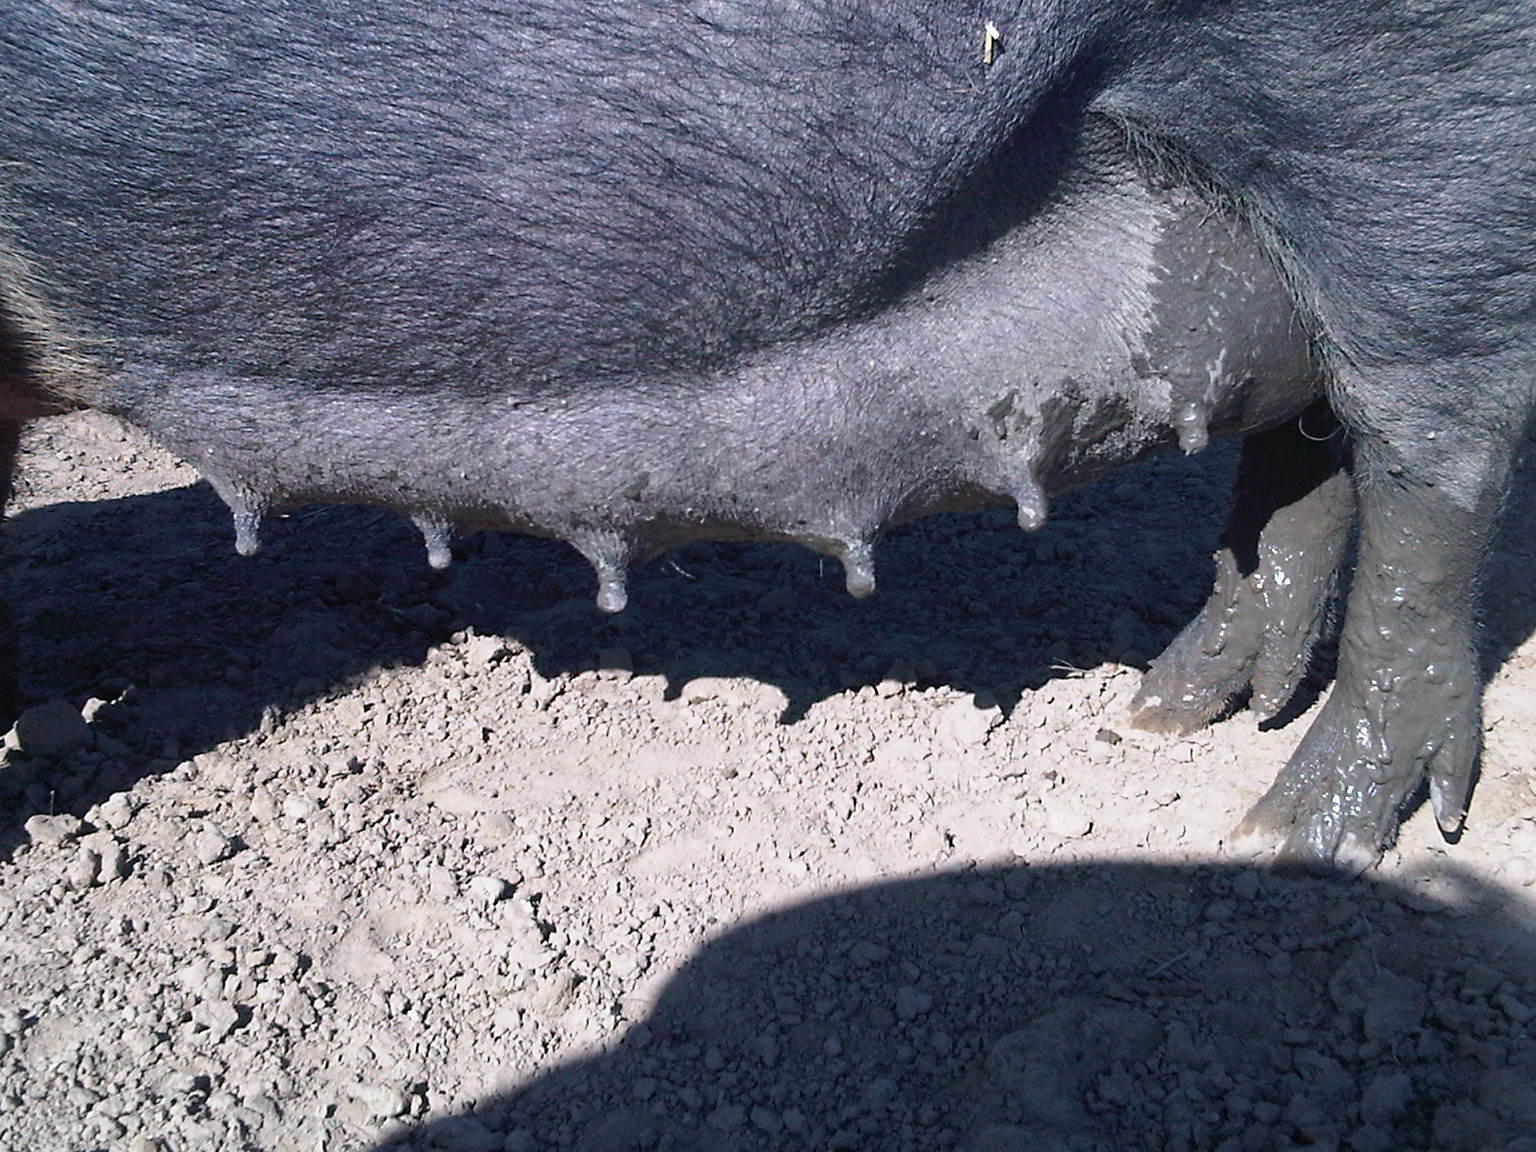 Approximately two weeks prior to the actual date, the sows teats enlarge and there is an increase in prominent veins in the udder due to an augmented blood supply to the area